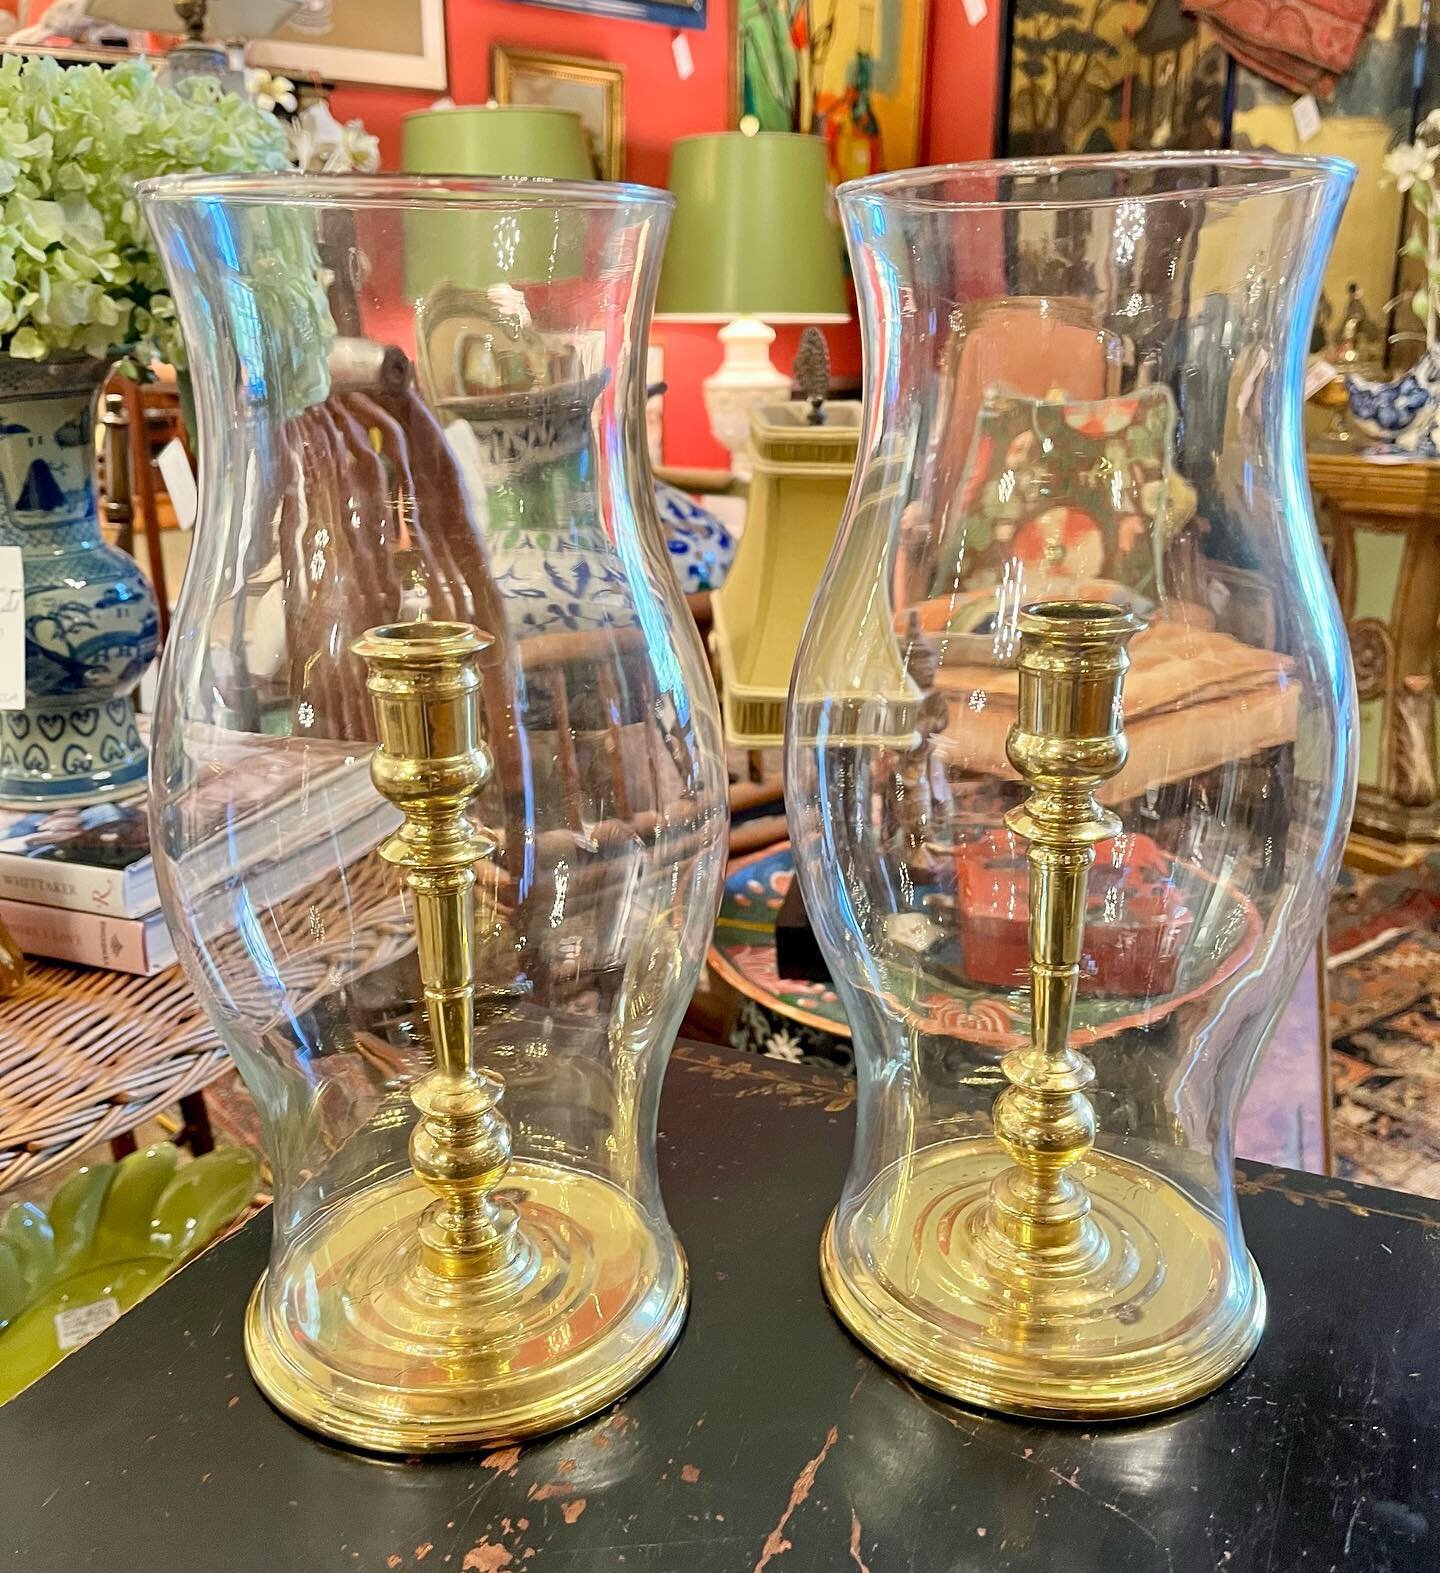 I love how we&rsquo;ve been seeing a return to traditional tabletop pieces for decorating, like these brass Baldwin glass hurricanes. Swipe to see styling inspo ➡️

These hurricanes are classic entertaining pieces that can be styled endless ways and 